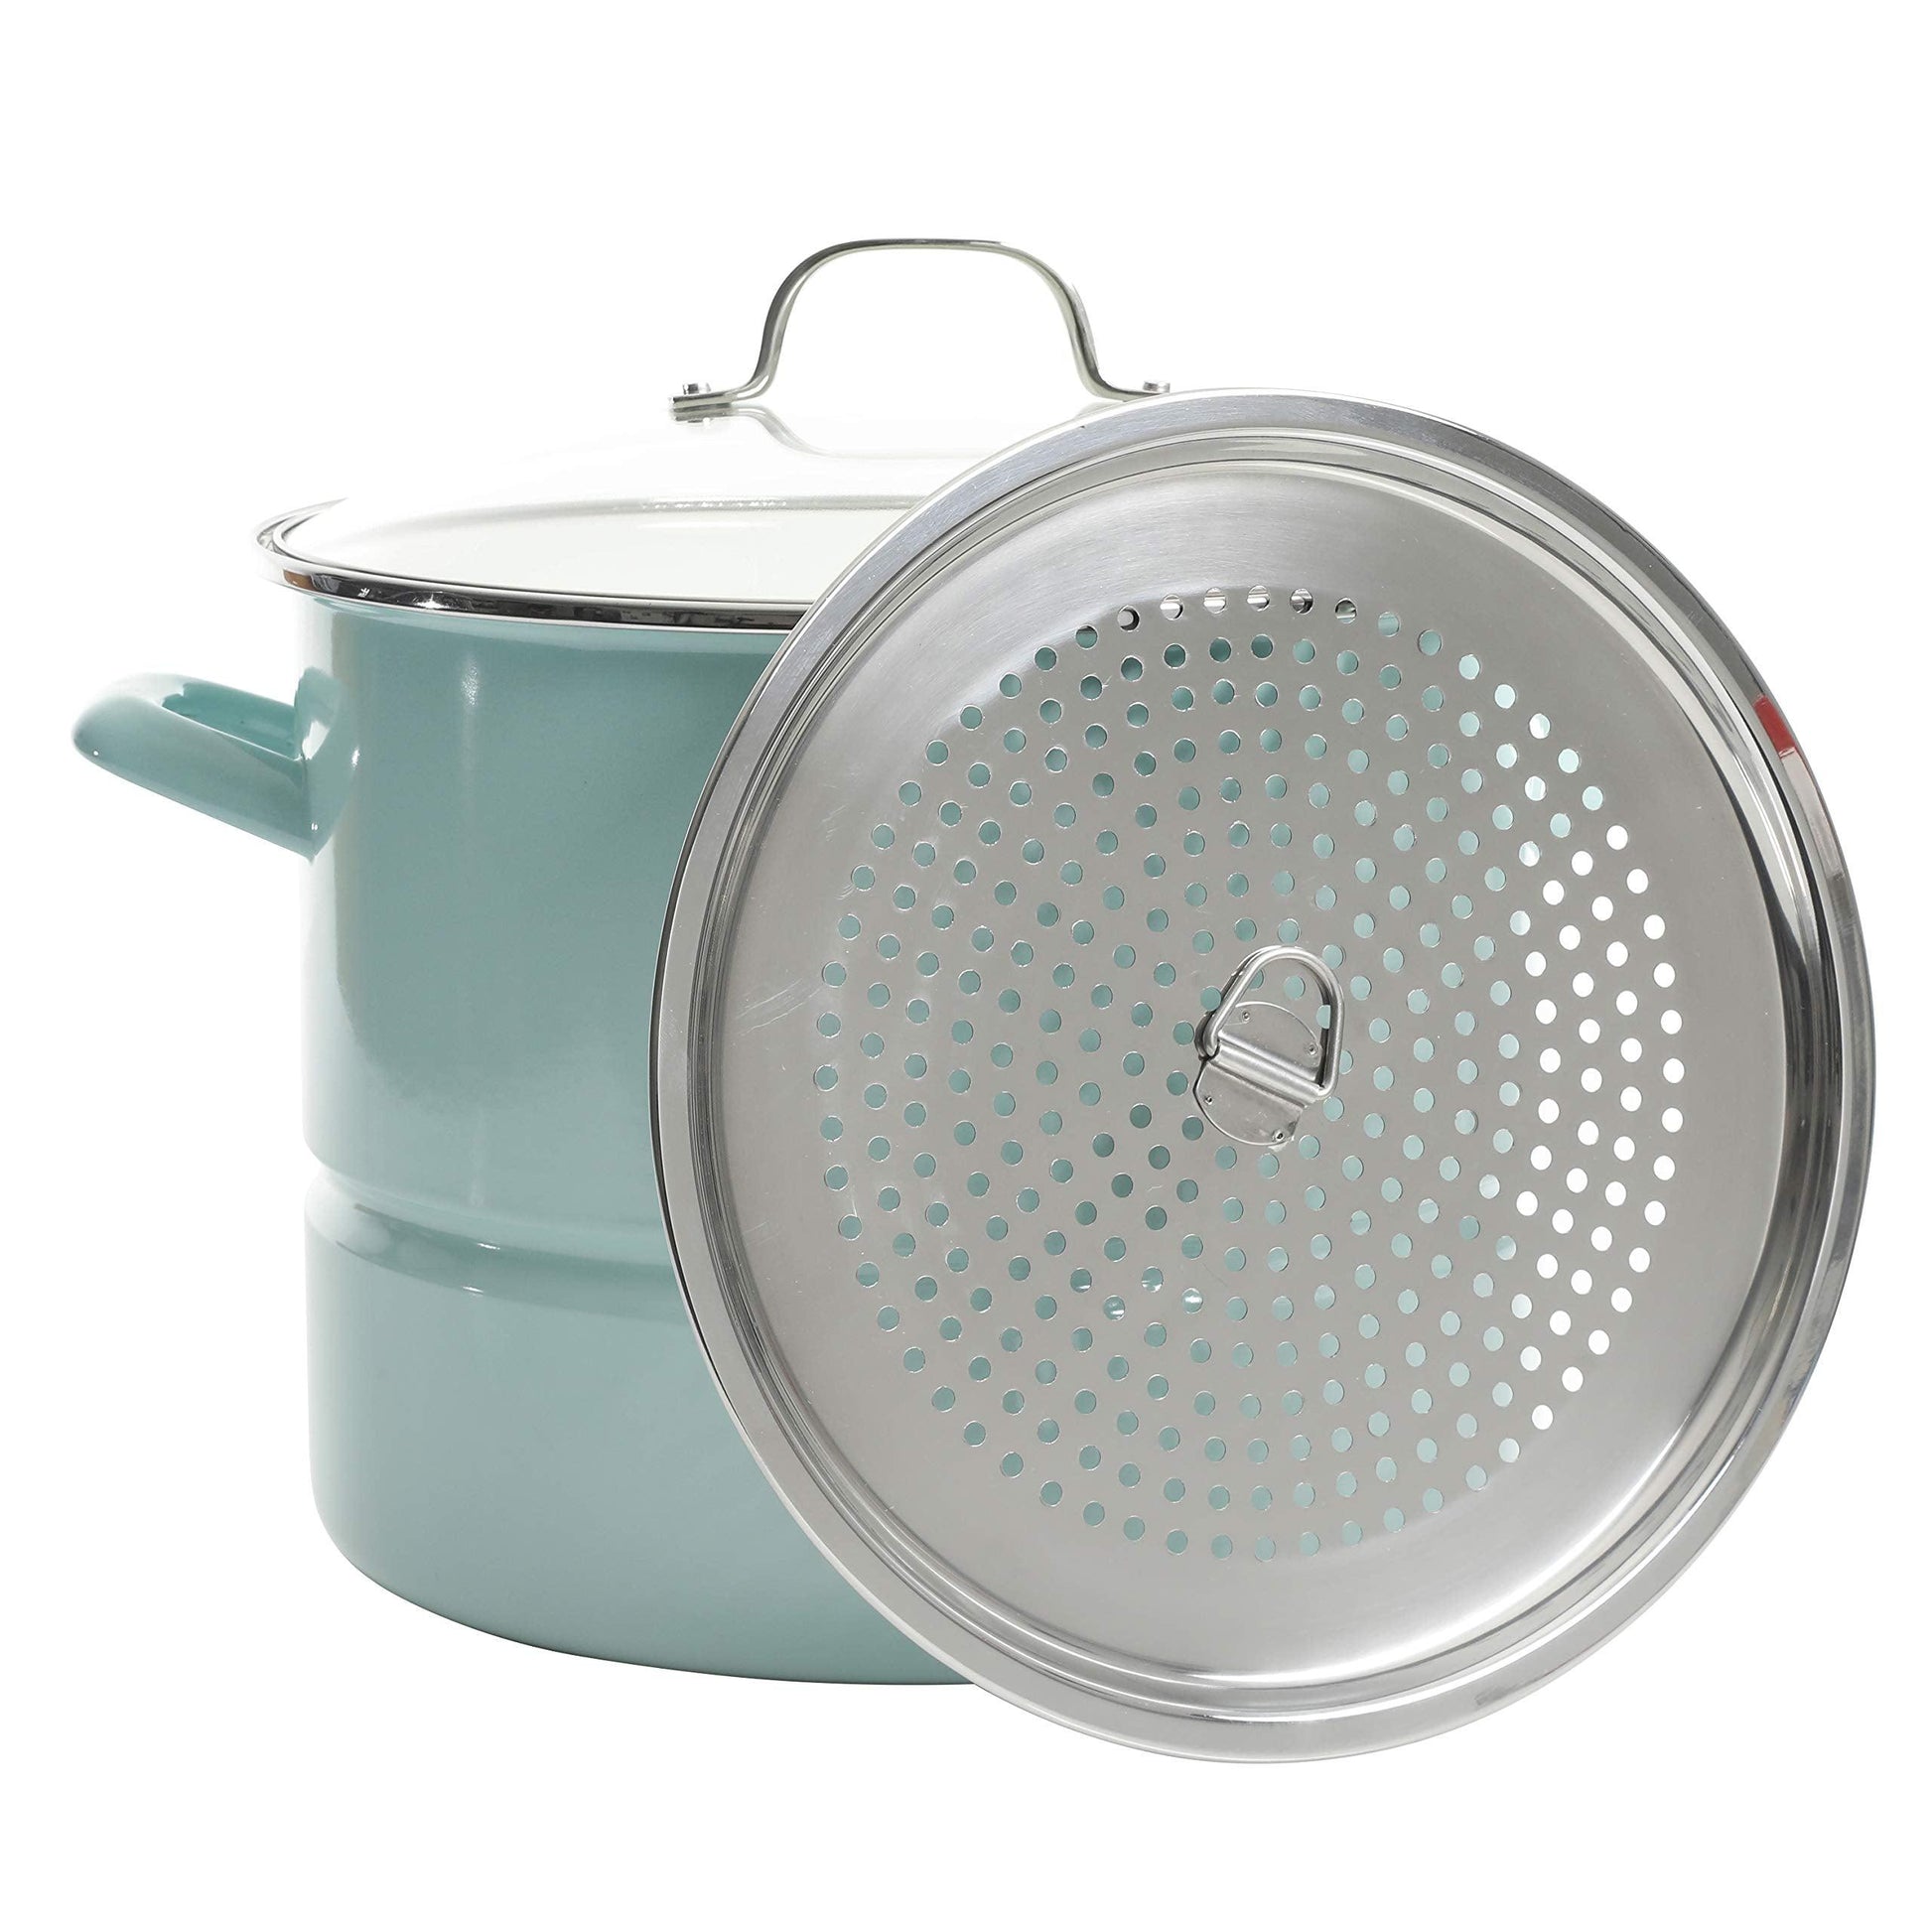 Kenmore Broadway Steamer Stock Pot with Insert and Lid, 16-Quart, Glacier Blue - CookCave